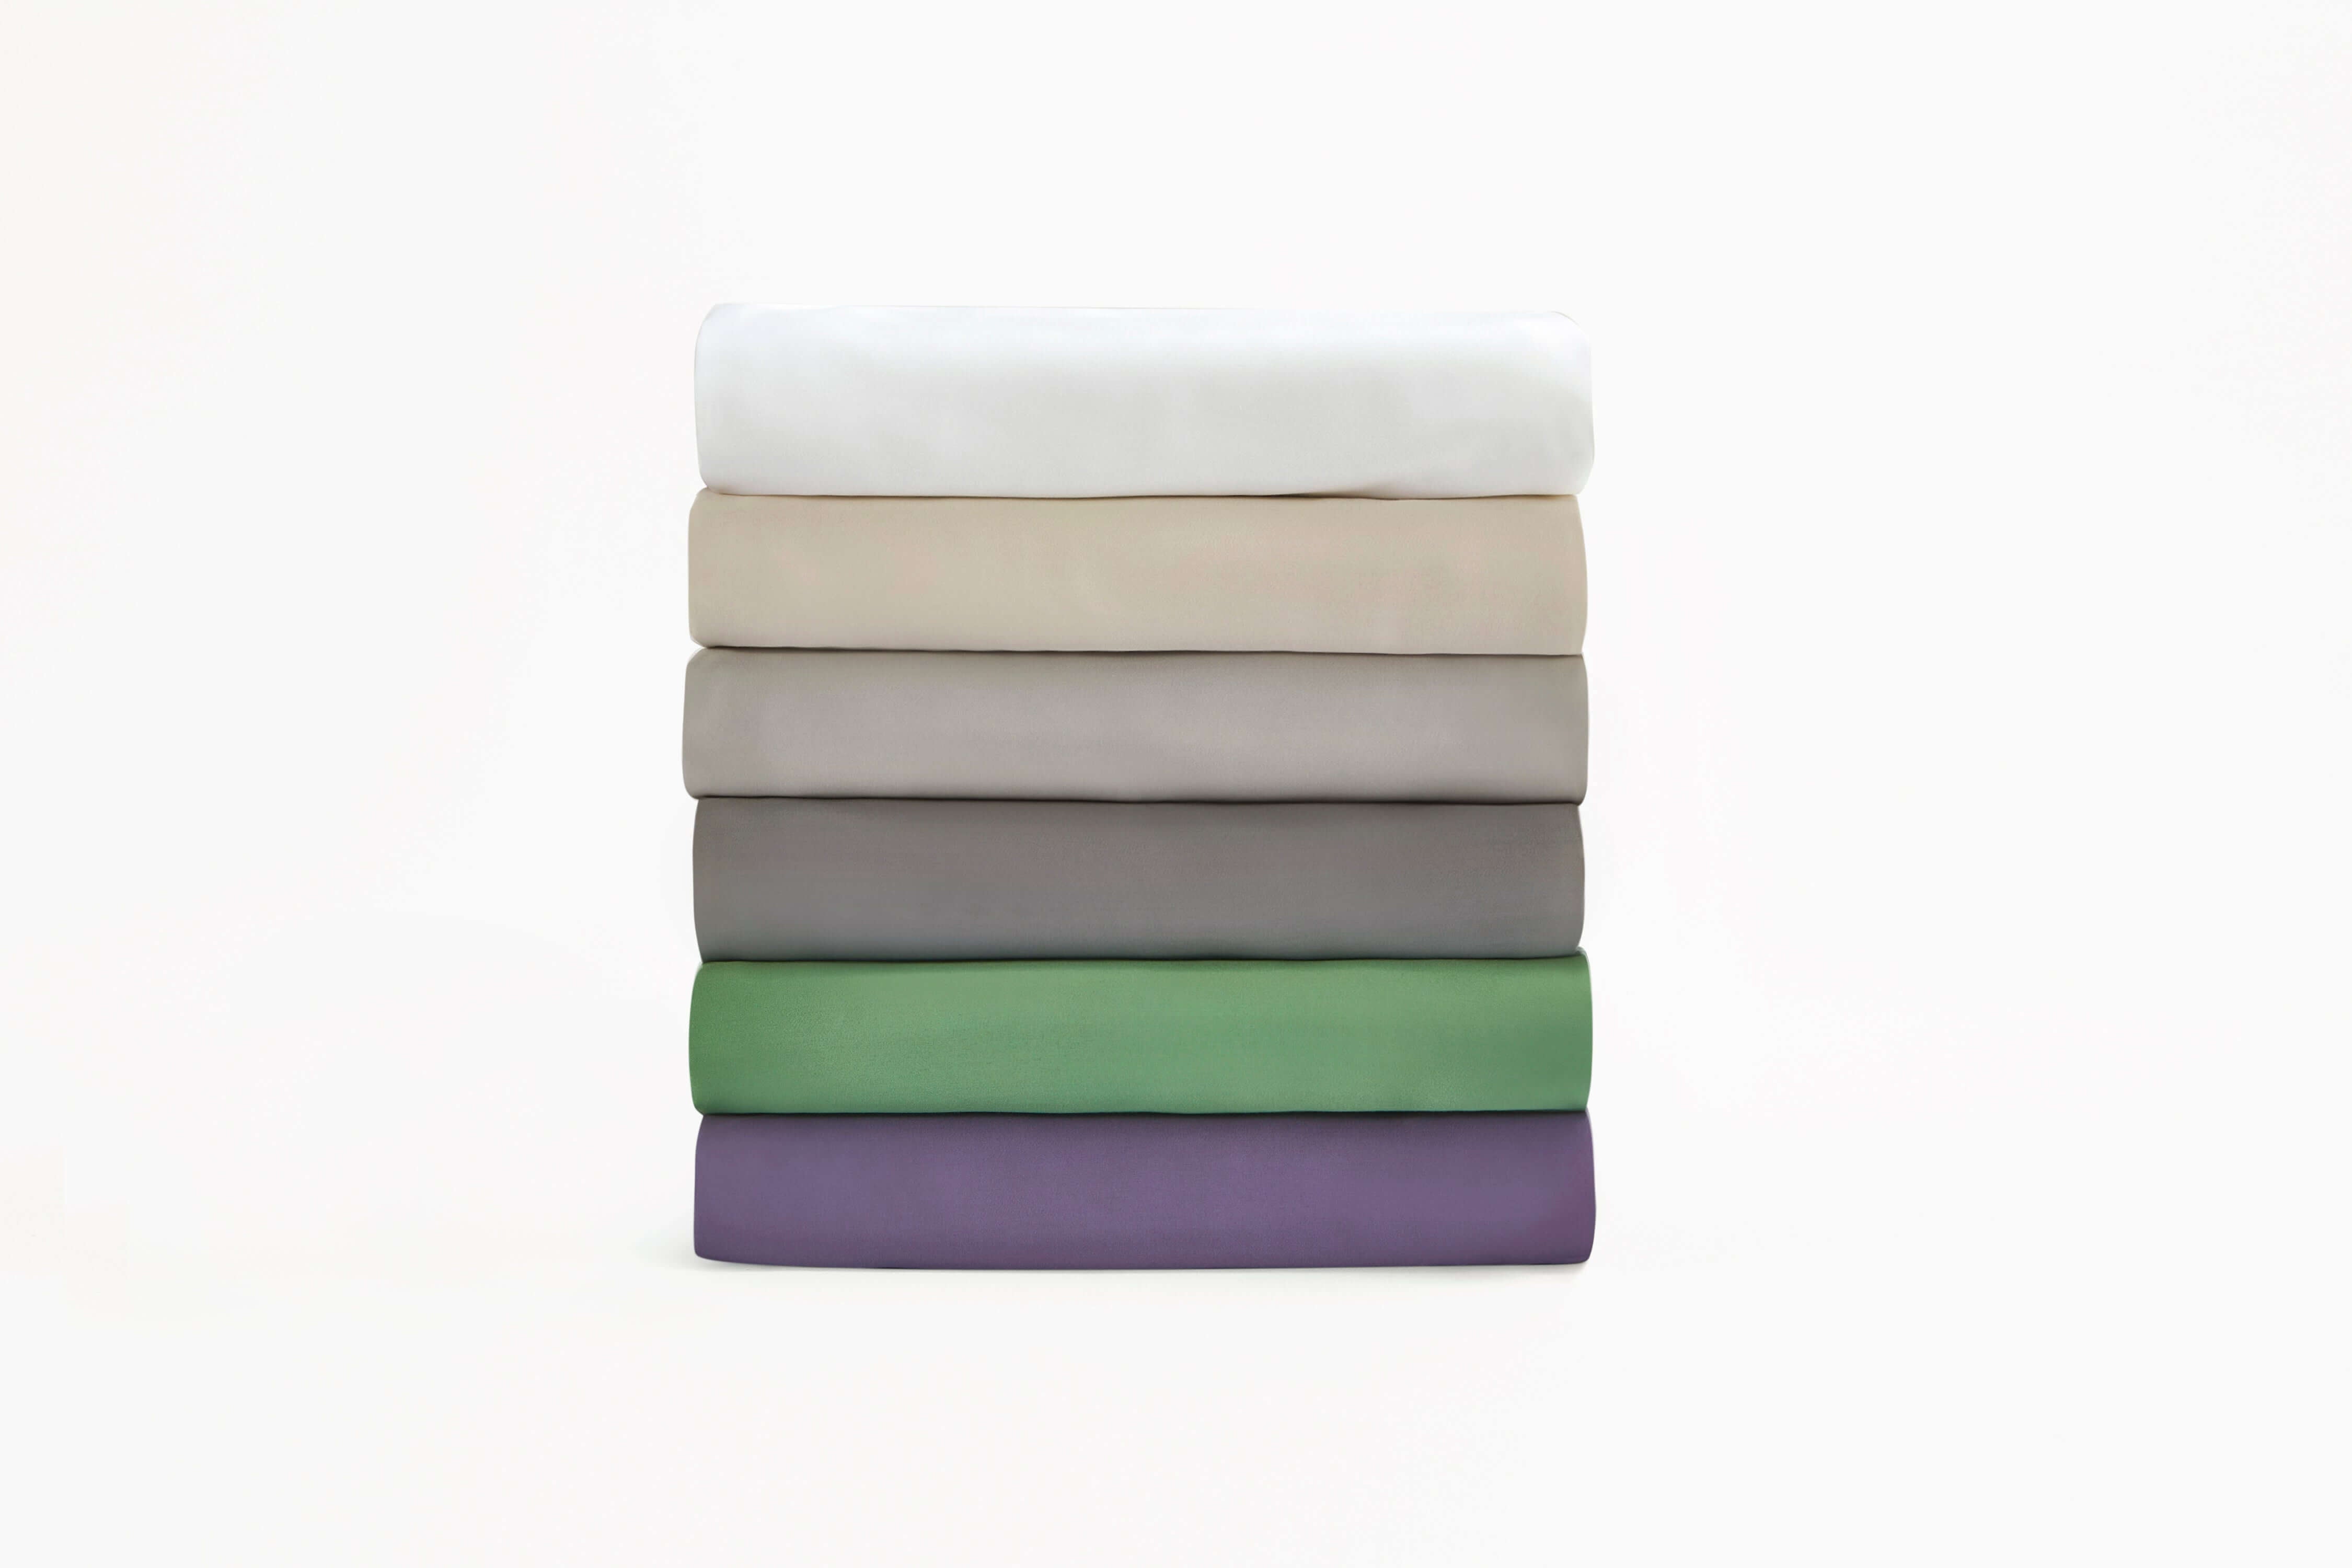 Sheets and Towels Move-In Bundle